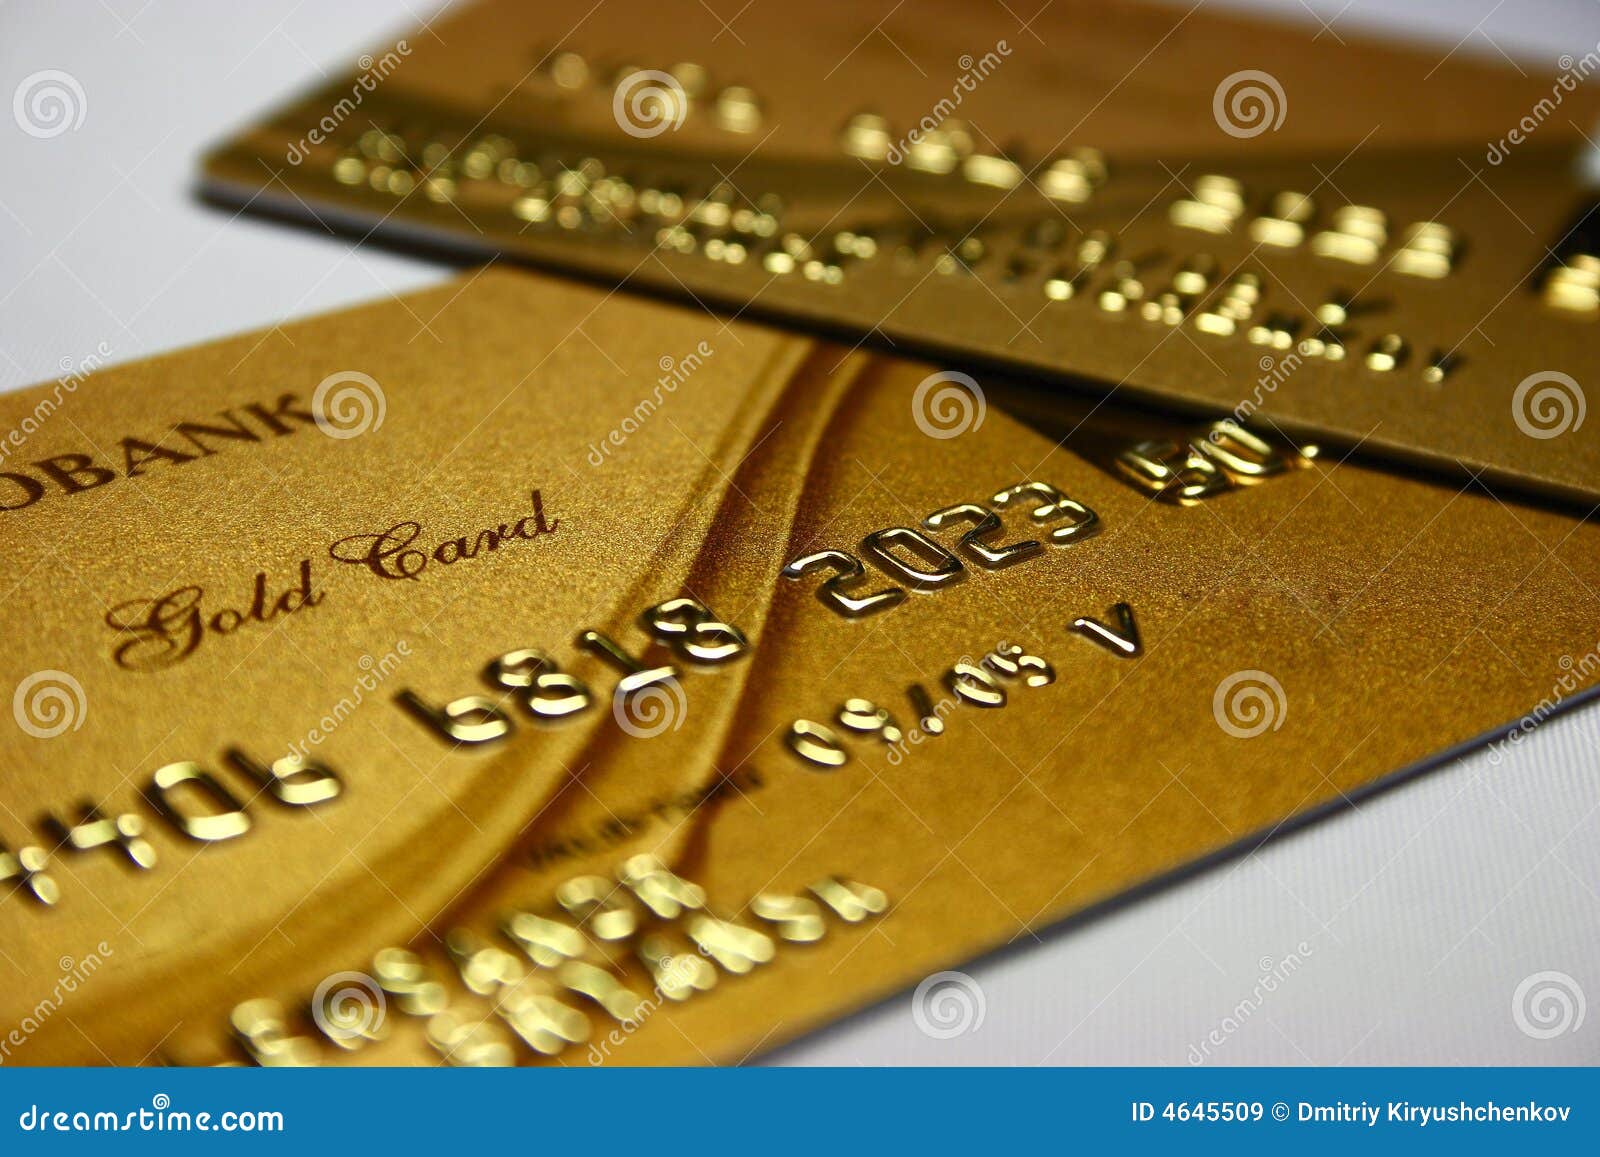 Gold Bank Card Royalty Free Stock Images - Image: 4645509